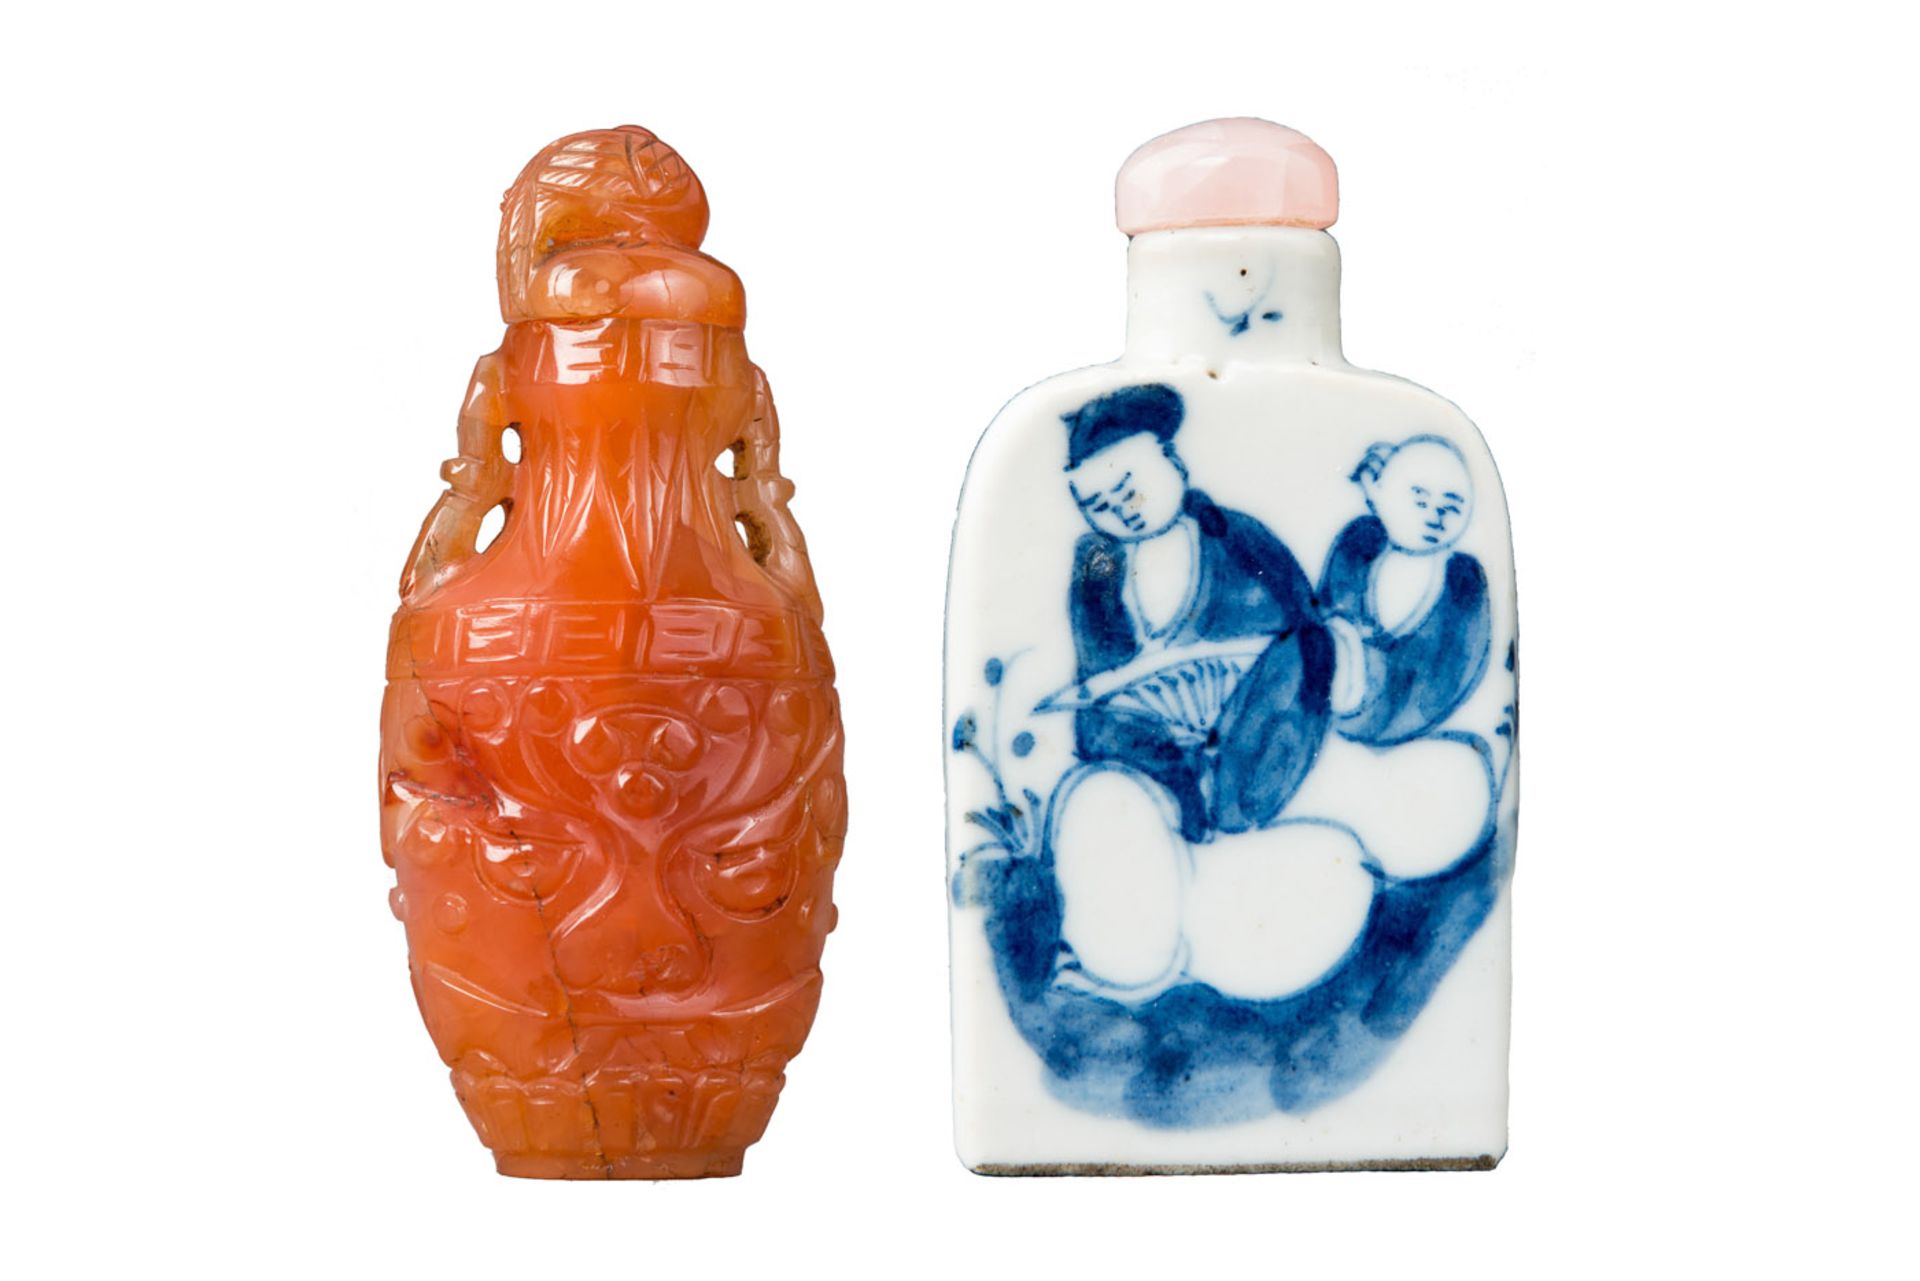 A GROUP OF TWO SNUFFBOTTLES  China, 19th – ca. early 20th century  A) SNUFFBOTTLE WITH SCHOLAR AND